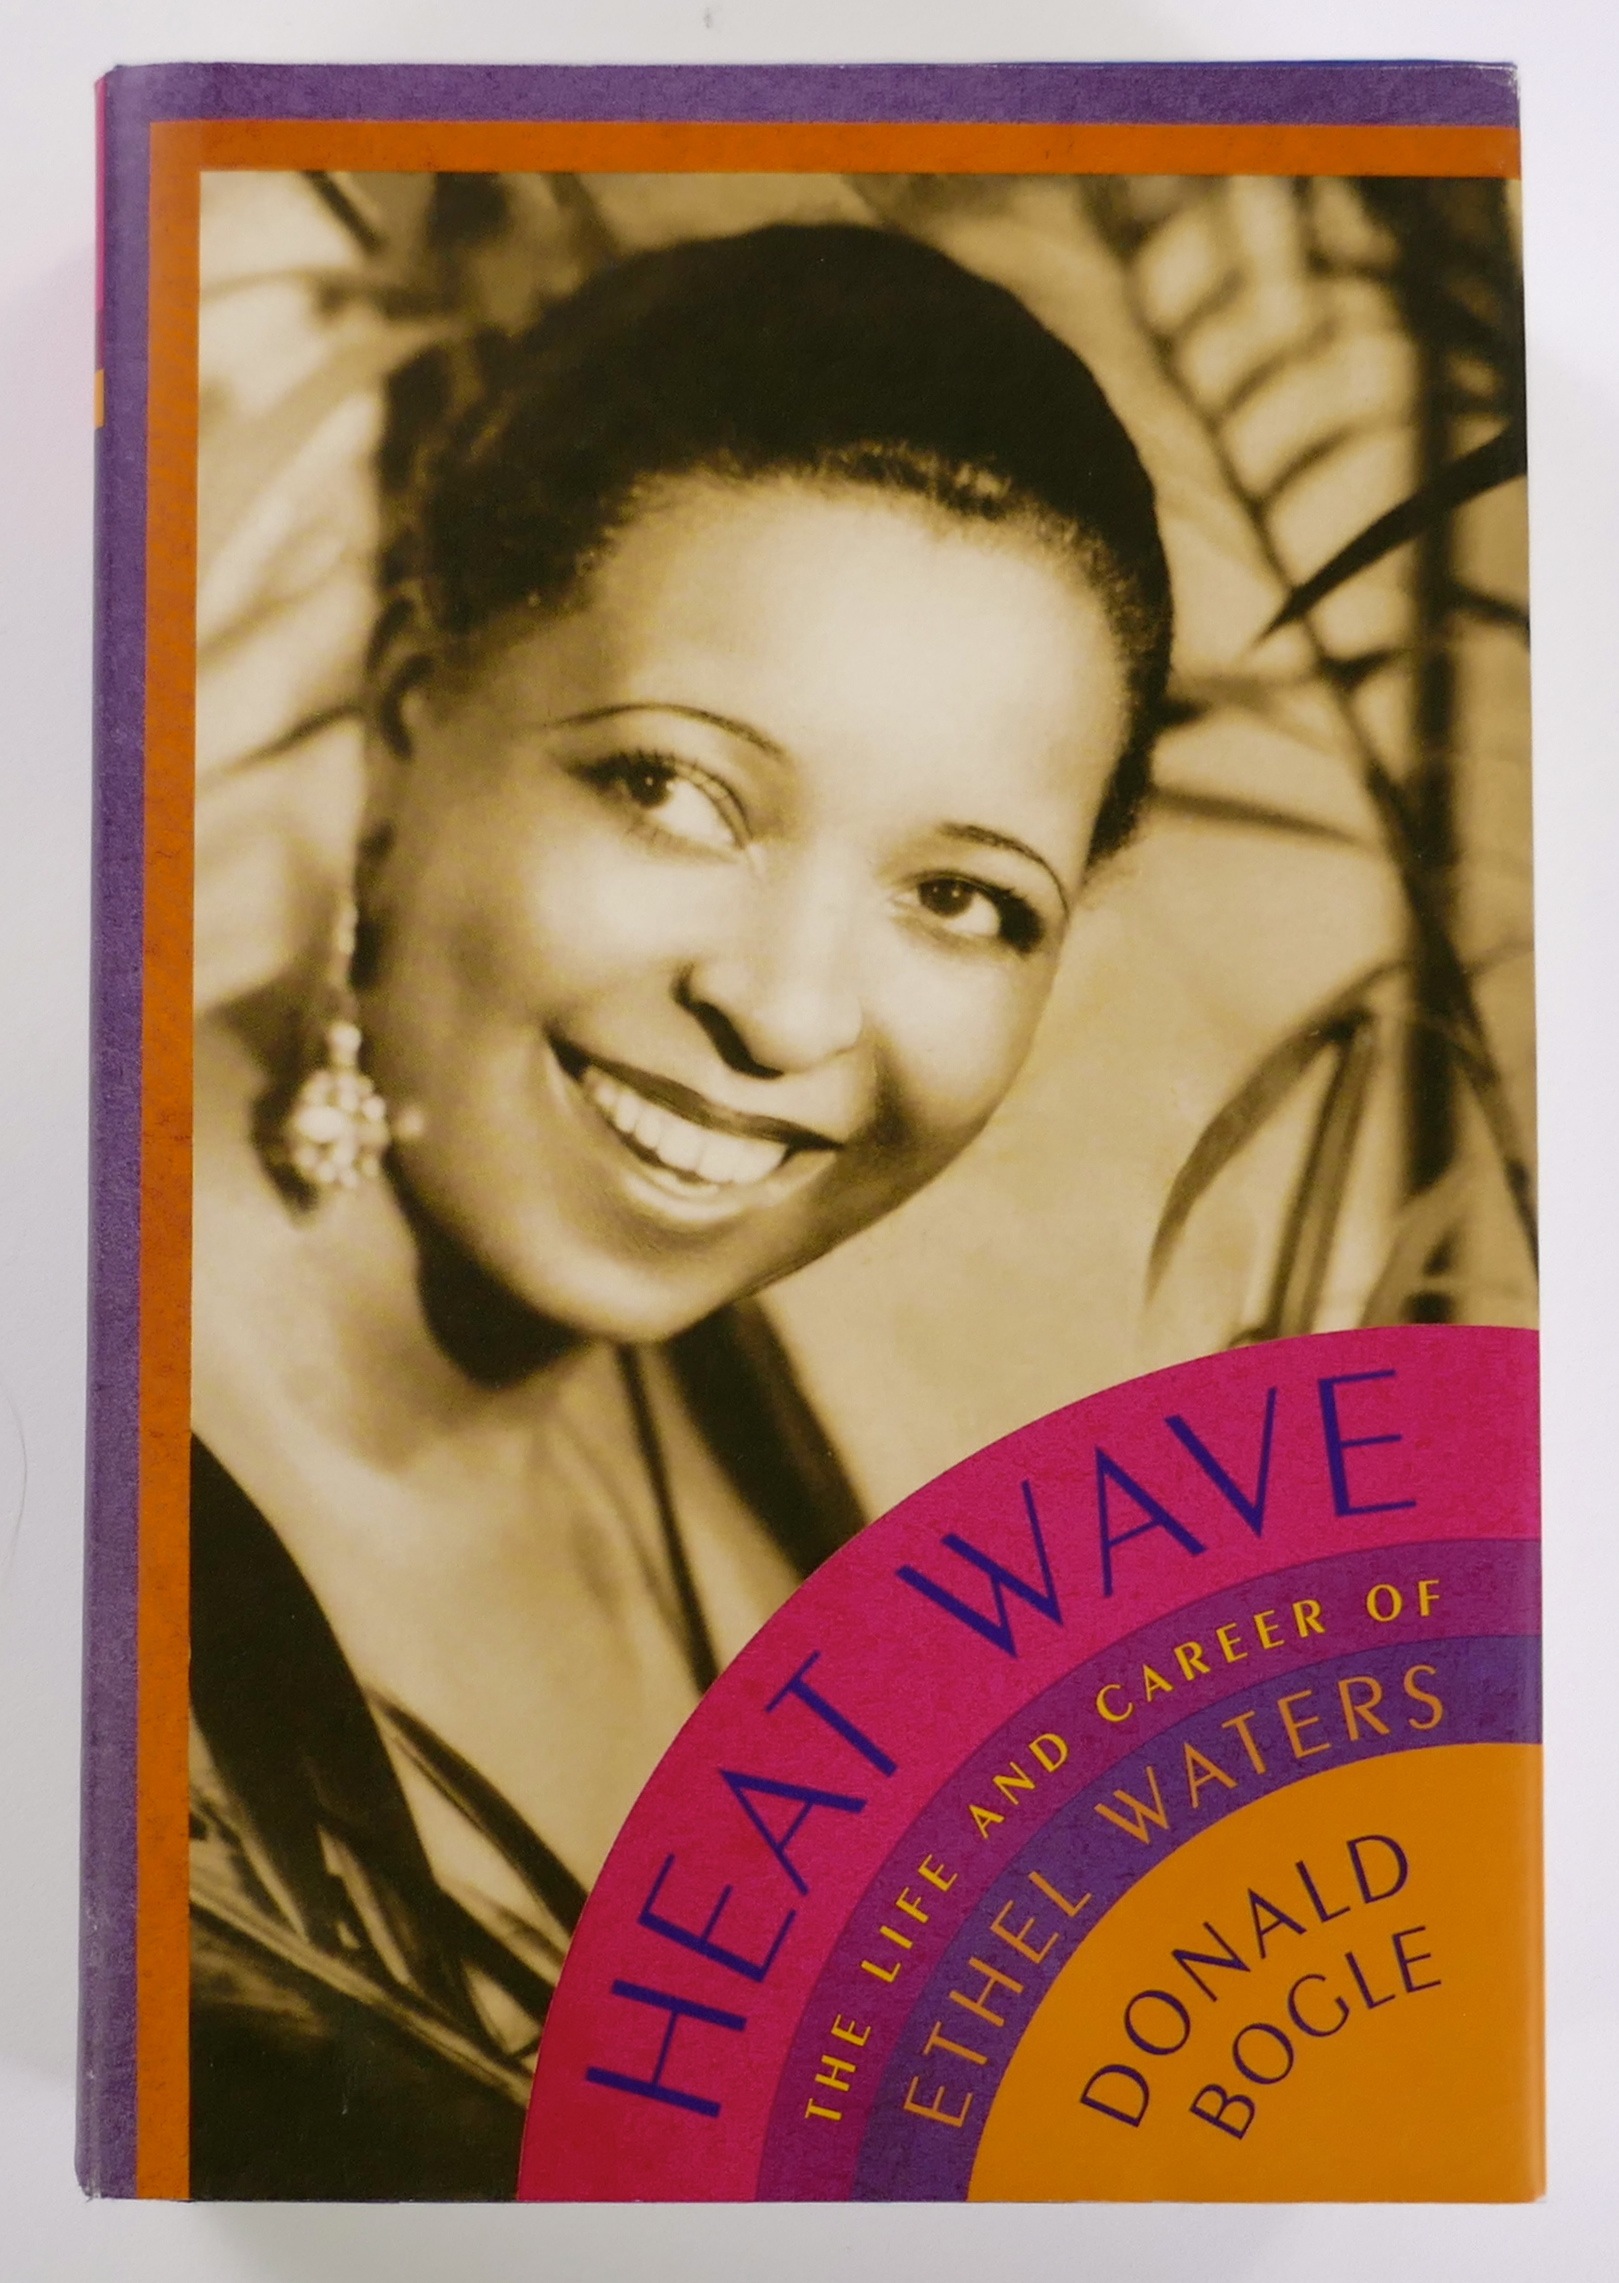 Heat Wave: The Life and Career of Ethel Waters - Bogle, Donald